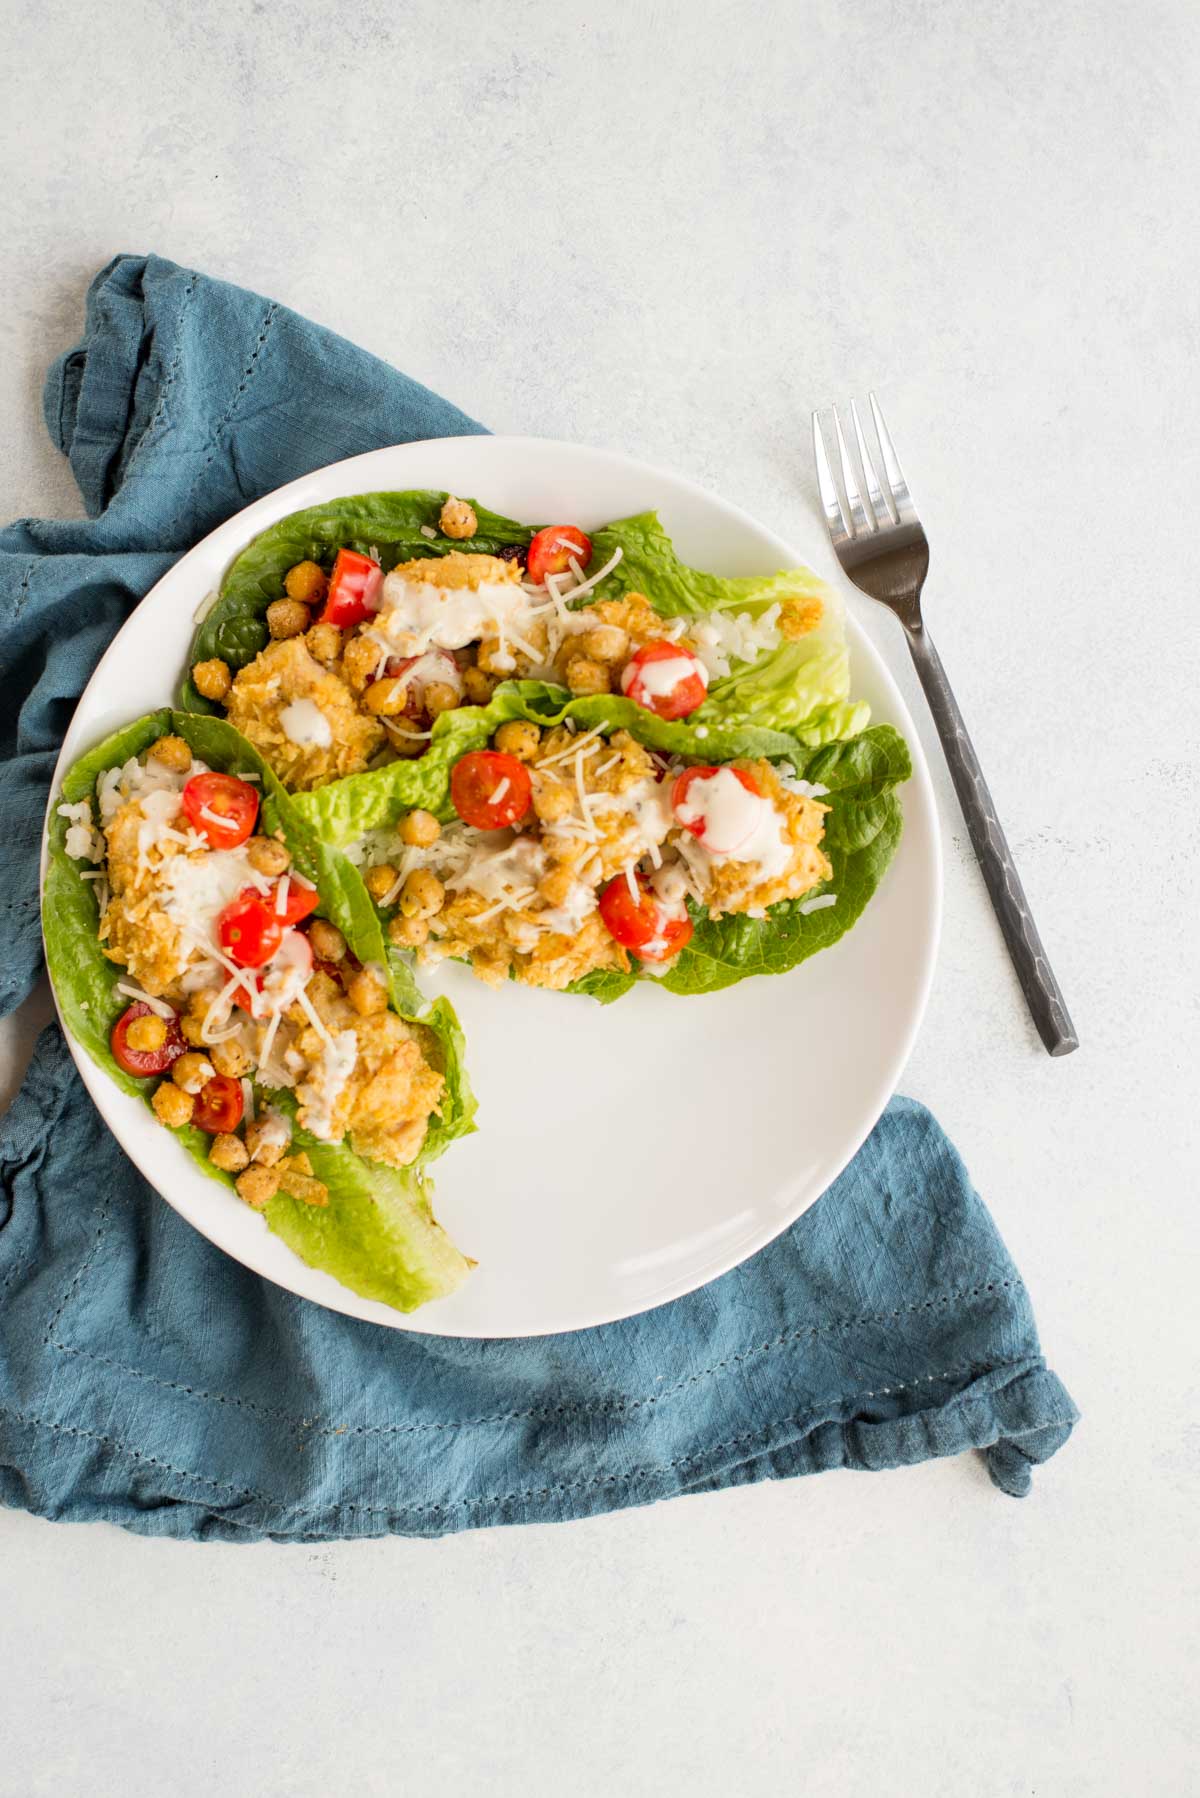 This quick mean is delicious, gluten-free and full of flavor. Healthy breaded chicken in a crispy lettuce wrap.